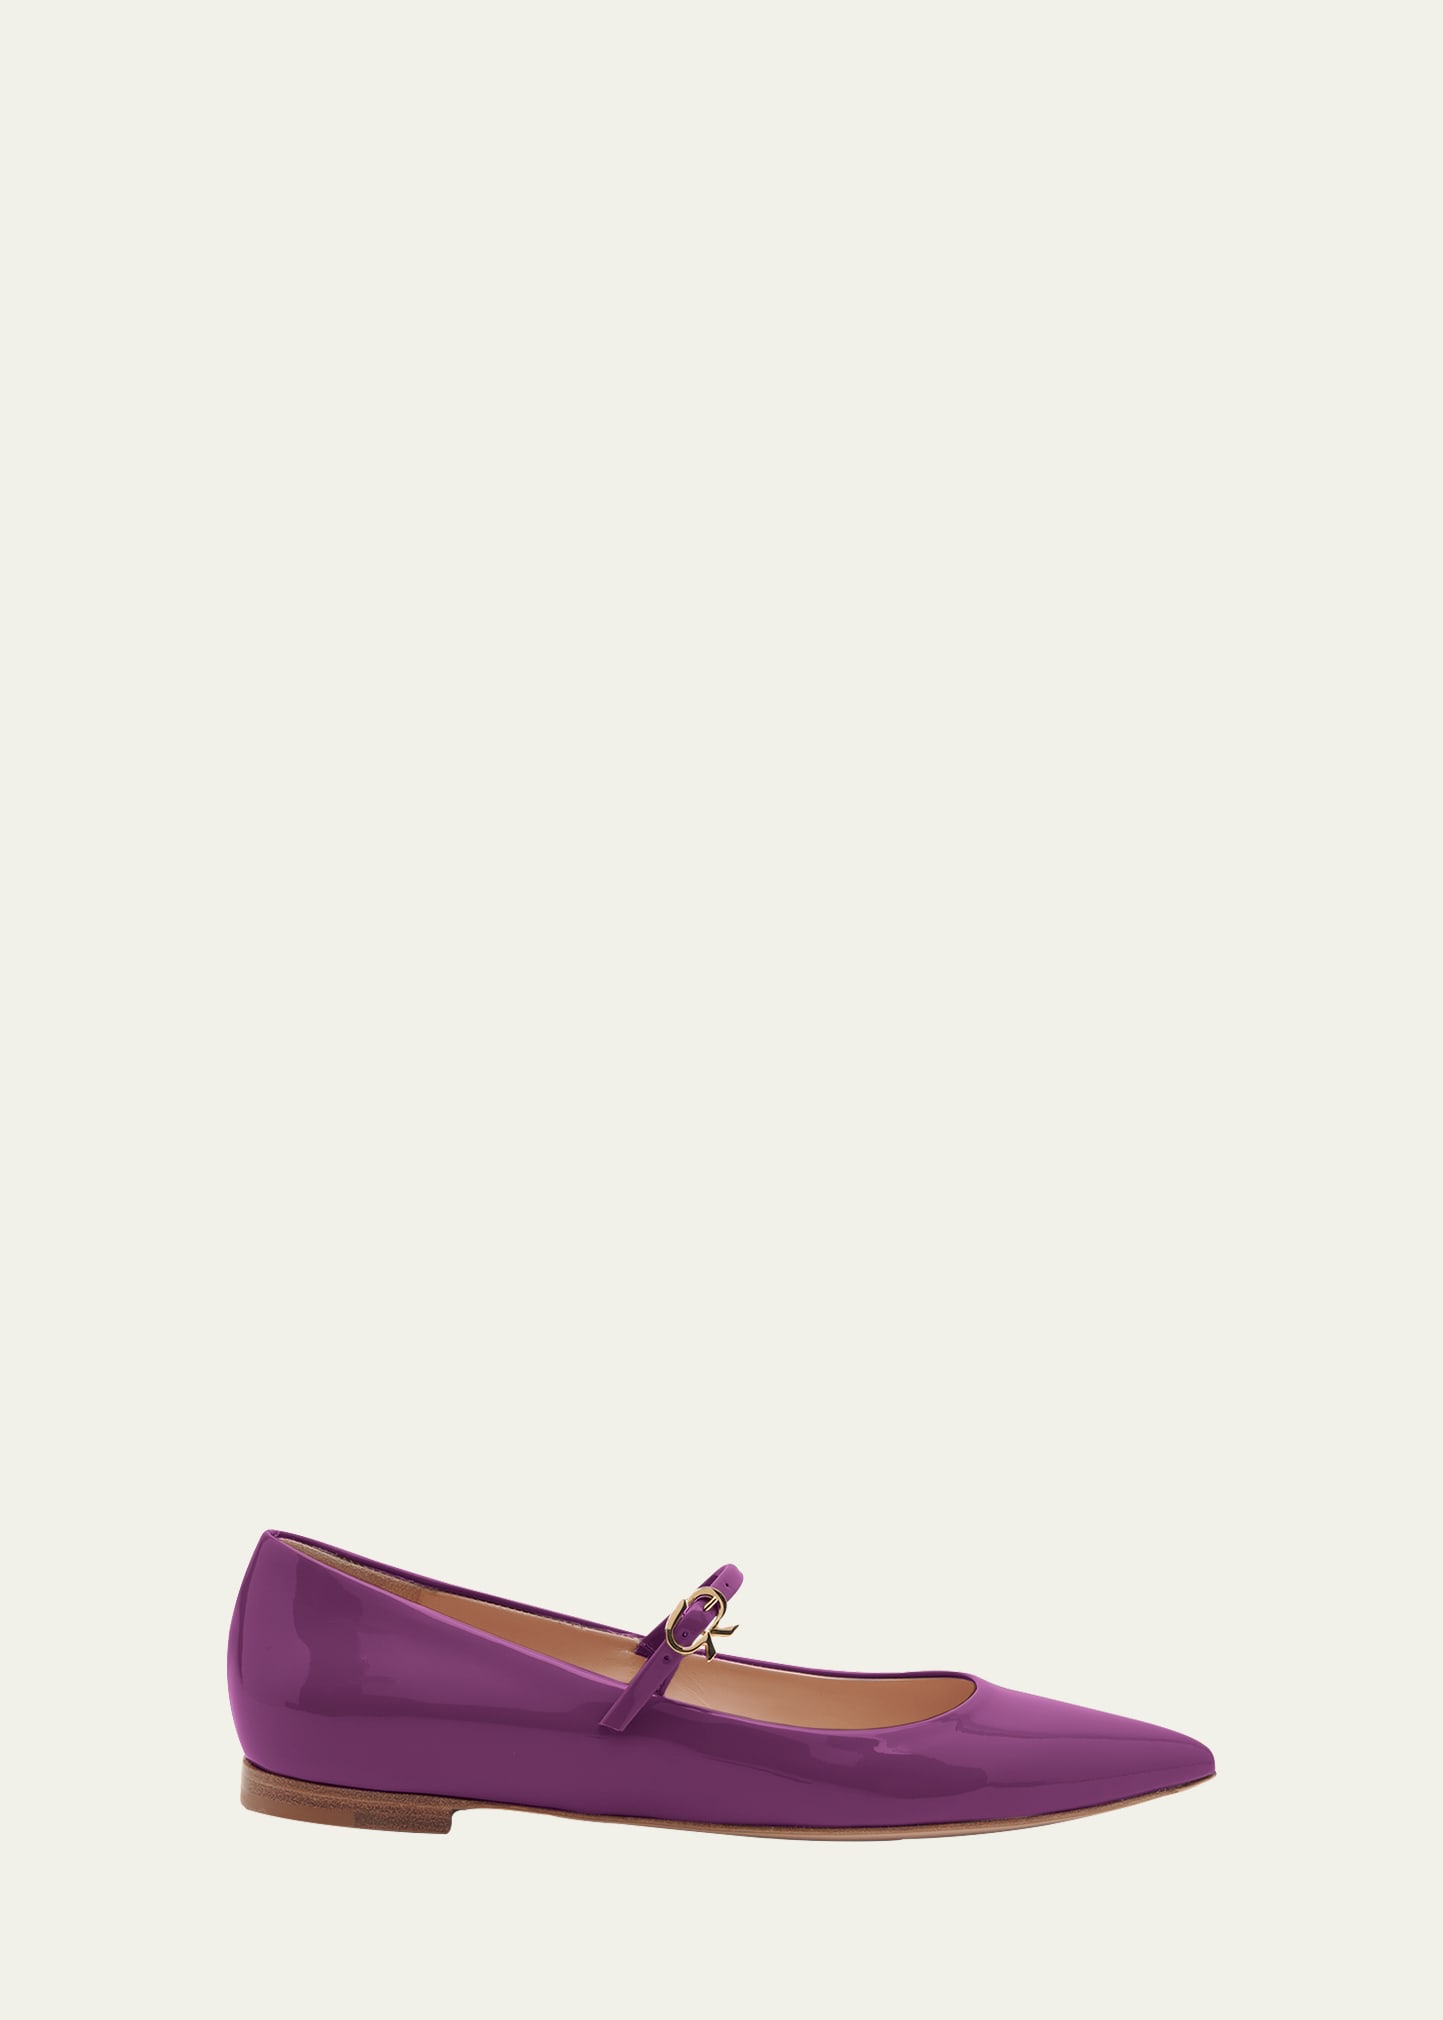 Gianvito Rossi Patent Mary Jane Buckle Ballerina Flats In Violet